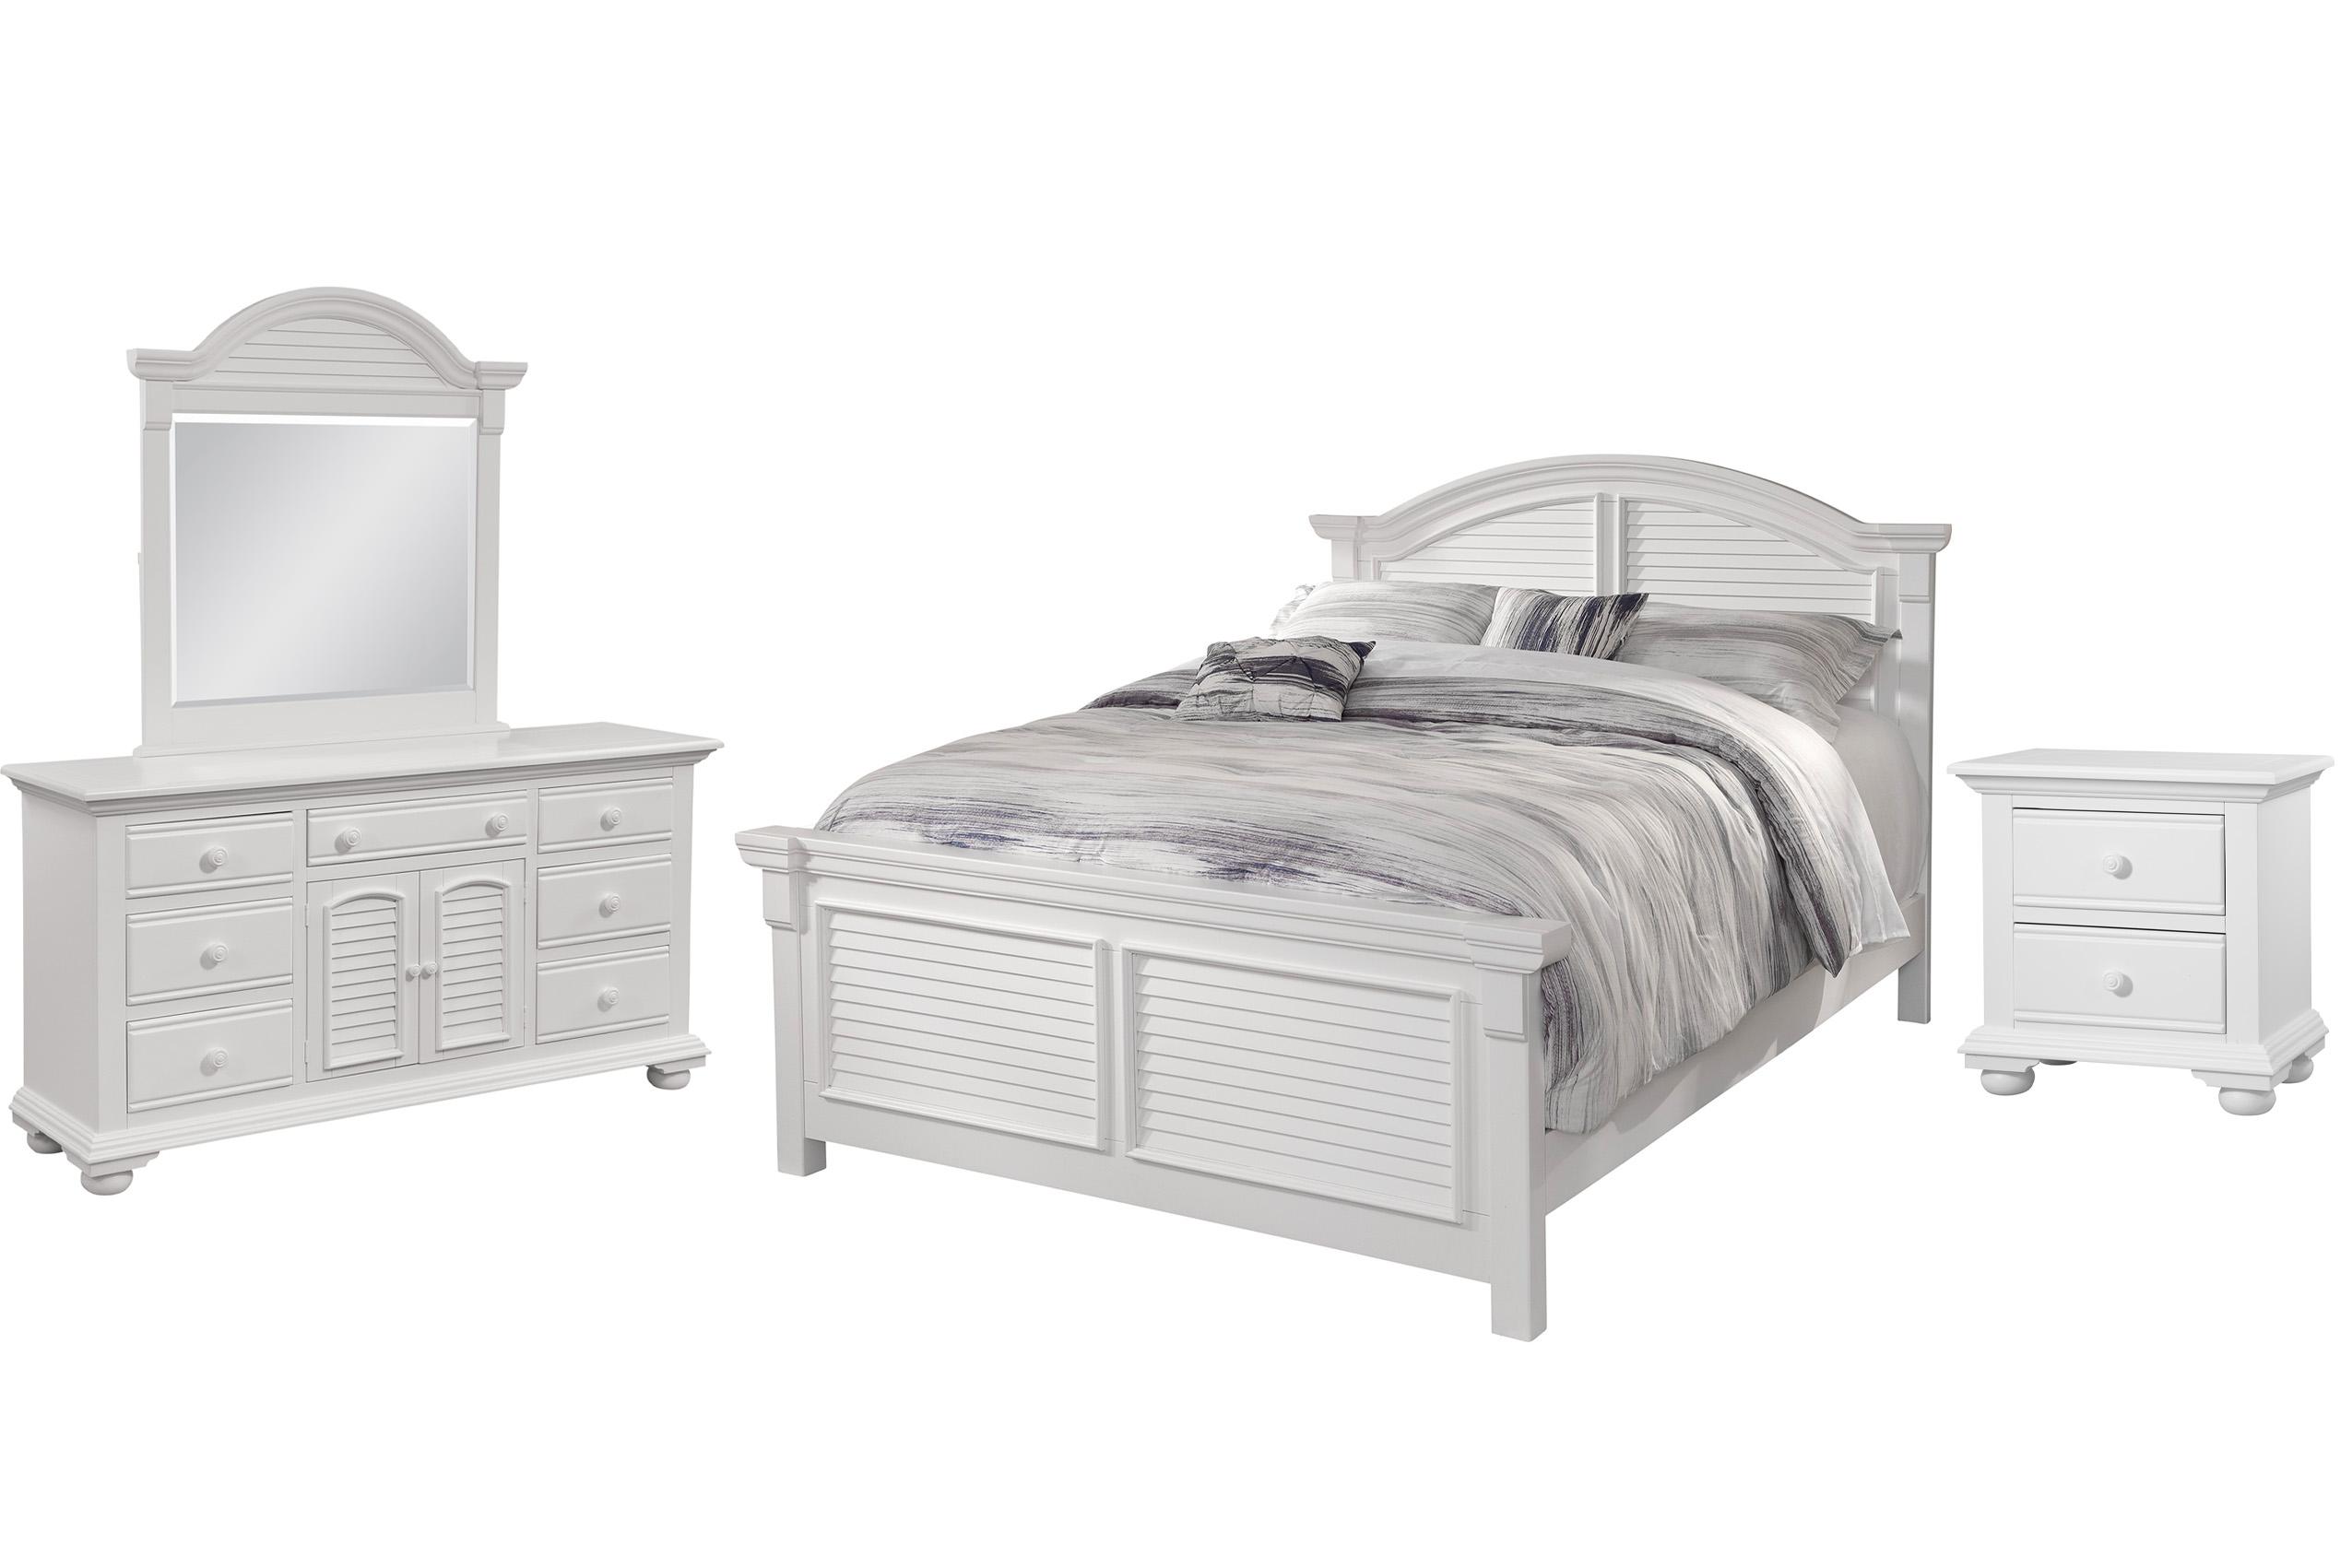 Classic, Traditional, Cottage Panel Bedroom Set COTTAGE 6510-50PAN 6510-QARPN-4PC-Small Way in White 